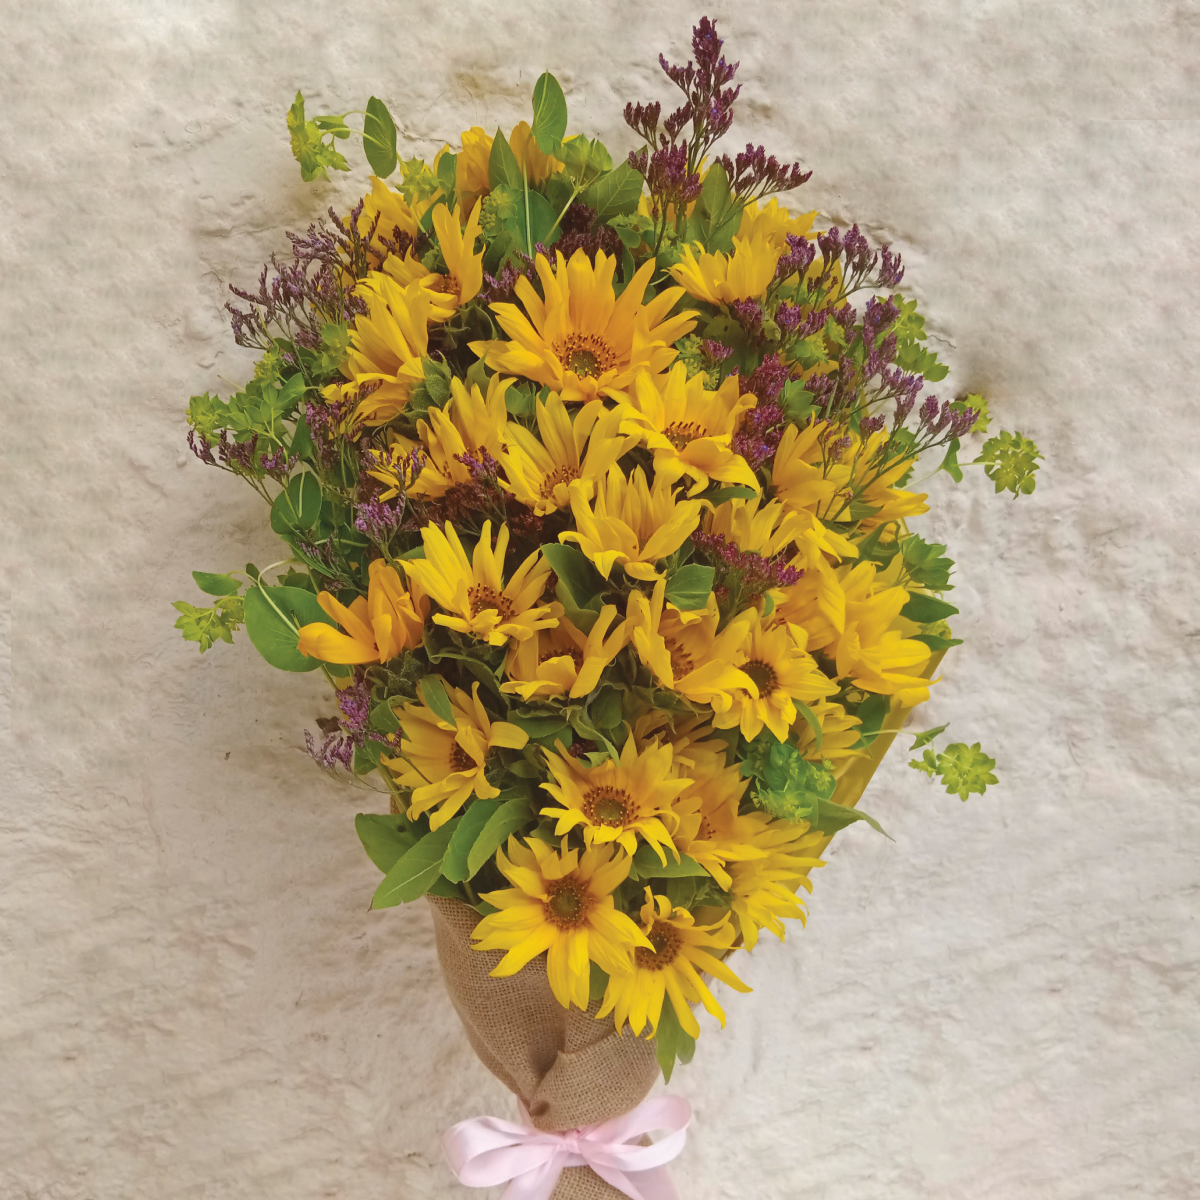 Sunflower Bouquet by Simona Flowers Kenya - Get the awesome sunflower bouquet and brighten up someone's day. It is brightly themed for a happy mood and wrapped with material for a classy finish. Have it delivered at home, work or even in the hospital on the same day.